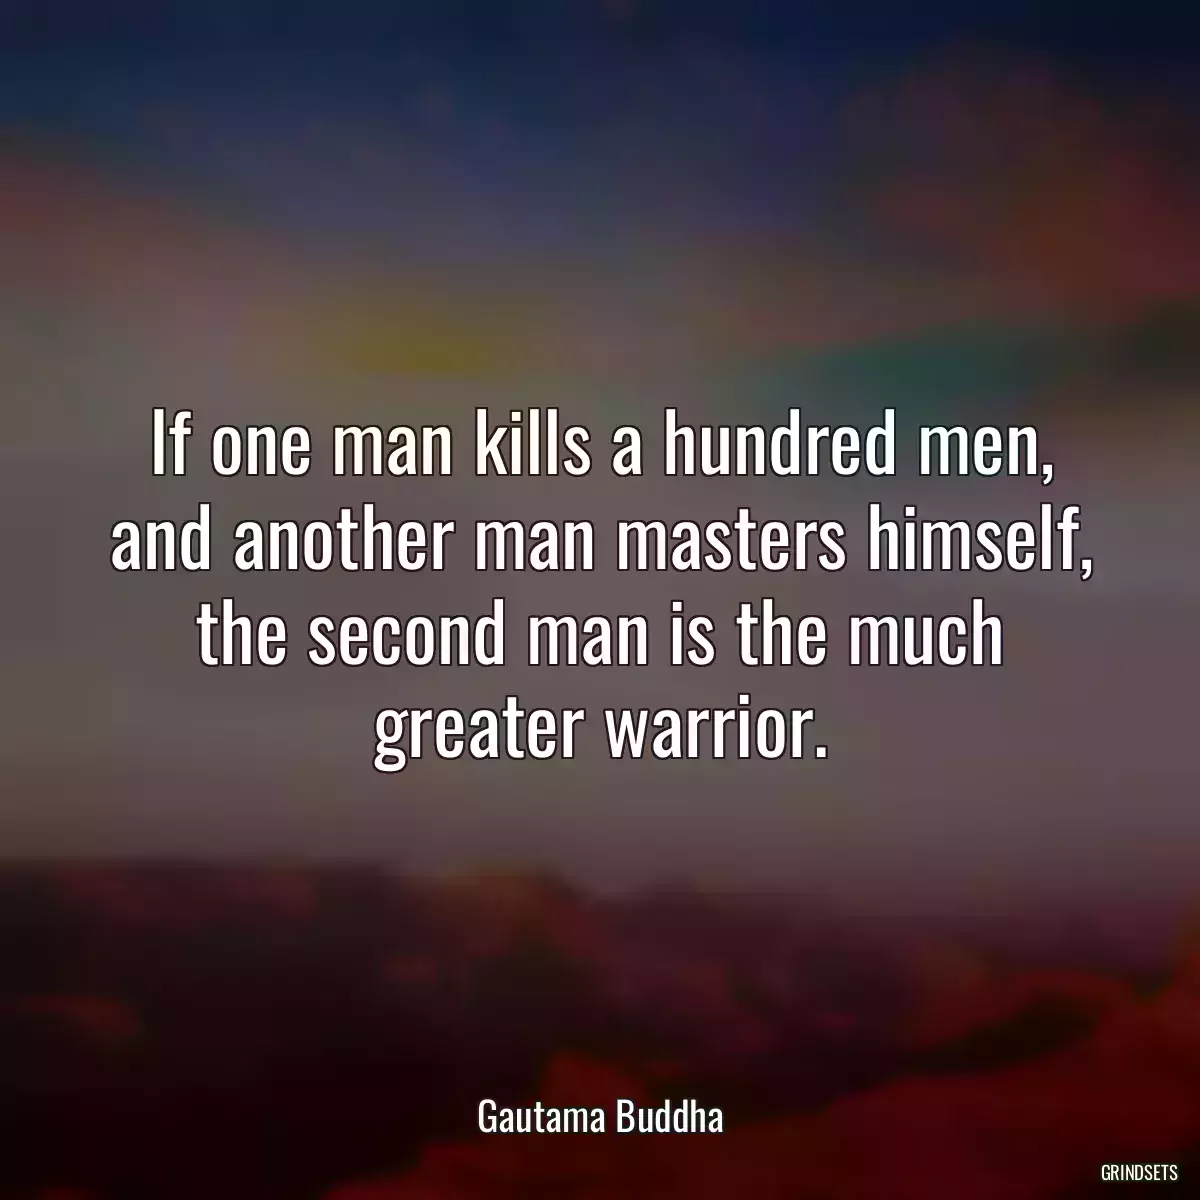 If one man kills a hundred men, and another man masters himself, the second man is the much greater warrior.